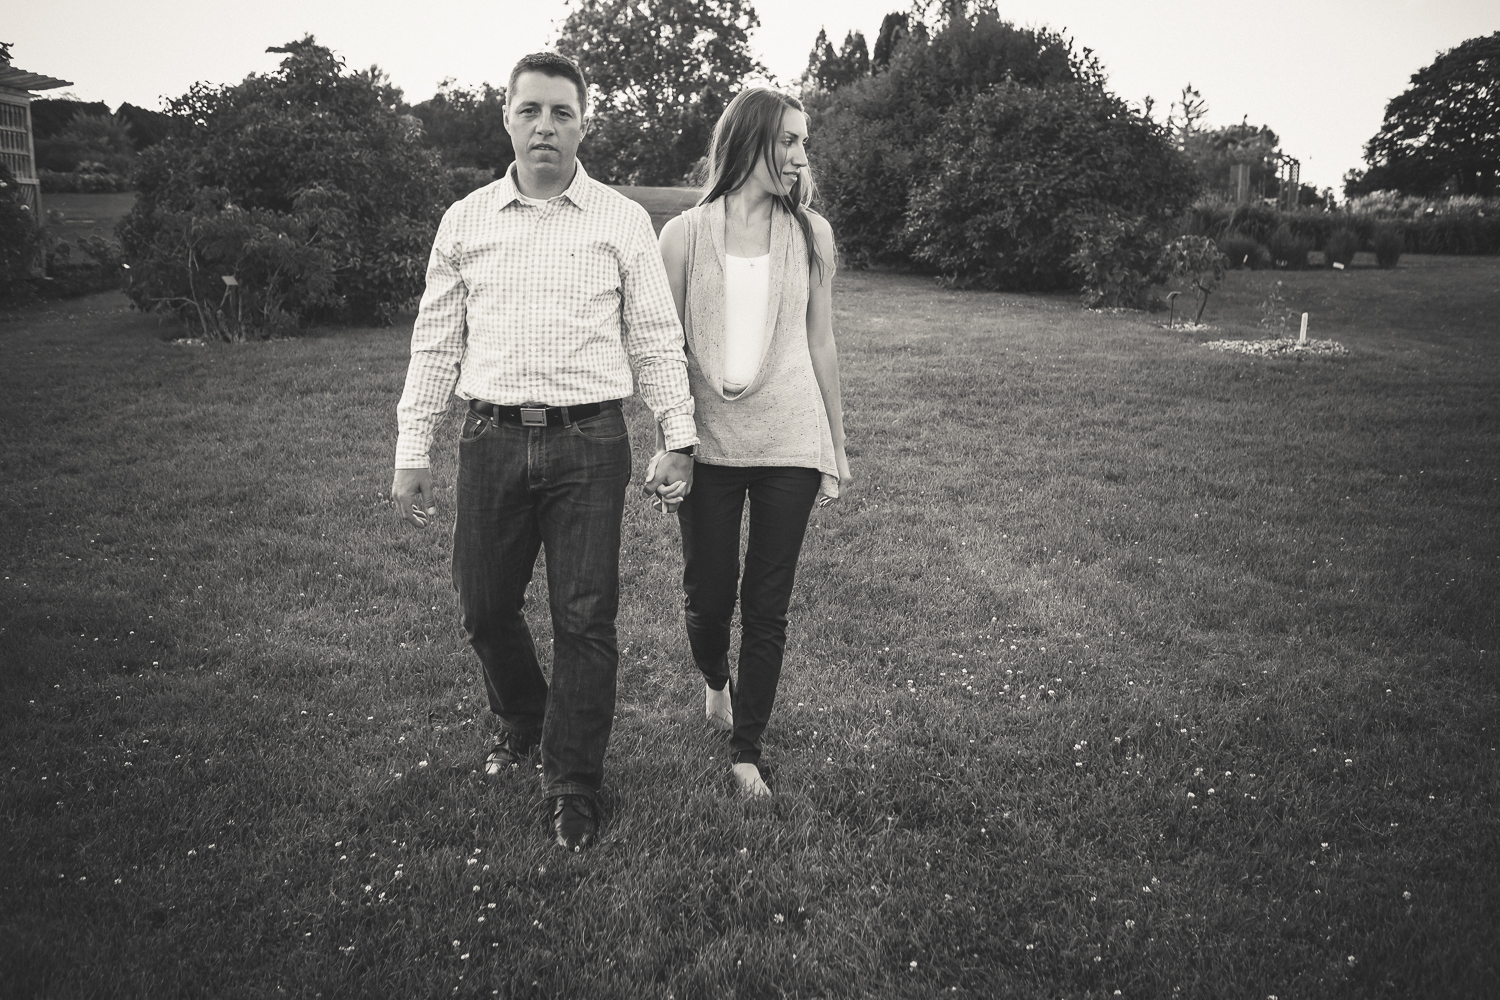  Engagement Session - Ornamental Gardens at the Central Experimental Farm in Ottawa. 